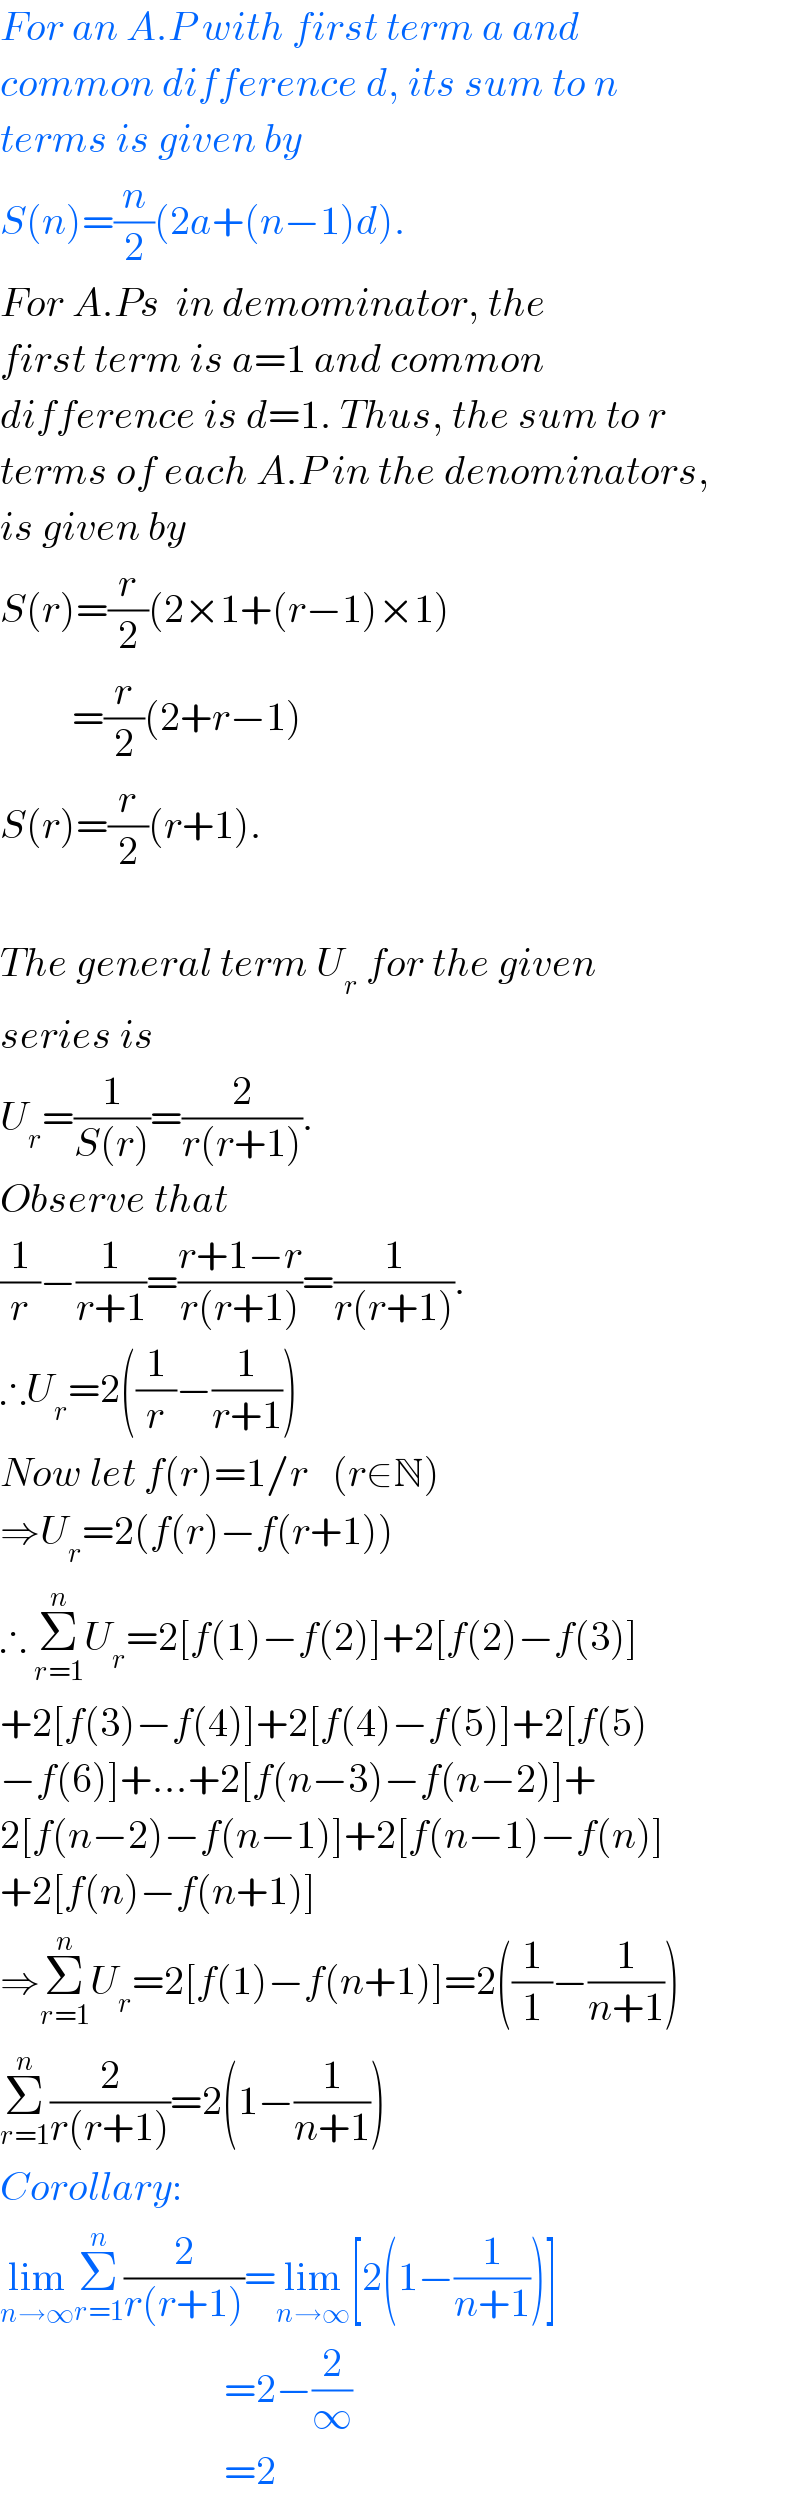 For an A.P with first term a and  common difference d, its sum to n  terms is given by  S(n)=(n/2)(2a+(n−1)d).  For A.Ps  in demominator, the  first term is a=1 and common   difference is d=1. Thus, the sum to r  terms of each A.P in the denominators,  is given by  S(r)=(r/2)(2×1+(r−1)×1)           =(r/2)(2+r−1)  S(r)=(r/2)(r+1).    The general term U_r  for the given  series is   U_r =(1/(S(r)))=(2/(r(r+1))).  Observe that  (1/r)−(1/(r+1))=((r+1−r)/(r(r+1)))=(1/(r(r+1))).   ∴U_r =2((1/r)−(1/(r+1)))  Now let f(r)=1/r   (r∈N)  ⇒U_r =2(f(r)−f(r+1))  ∴ Σ_(r=1) ^n U_r =2[f(1)−f(2)]+2[f(2)−f(3)]  +2[f(3)−f(4)]+2[f(4)−f(5)]+2[f(5)  −f(6)]+...+2[f(n−3)−f(n−2)]+  2[f(n−2)−f(n−1)]+2[f(n−1)−f(n)]  +2[f(n)−f(n+1)]  ⇒Σ_(r=1) ^n U_r =2[f(1)−f(n+1)]=2((1/1)−(1/(n+1)))  Σ_(r=1) ^n (2/(r(r+1)))=2(1−(1/(n+1)))   Corollary:  lim_(n→∞) Σ_(r=1) ^n (2/(r(r+1)))=lim_(n→∞) [2(1−(1/(n+1)))]                              =2−(2/∞)                              =2  